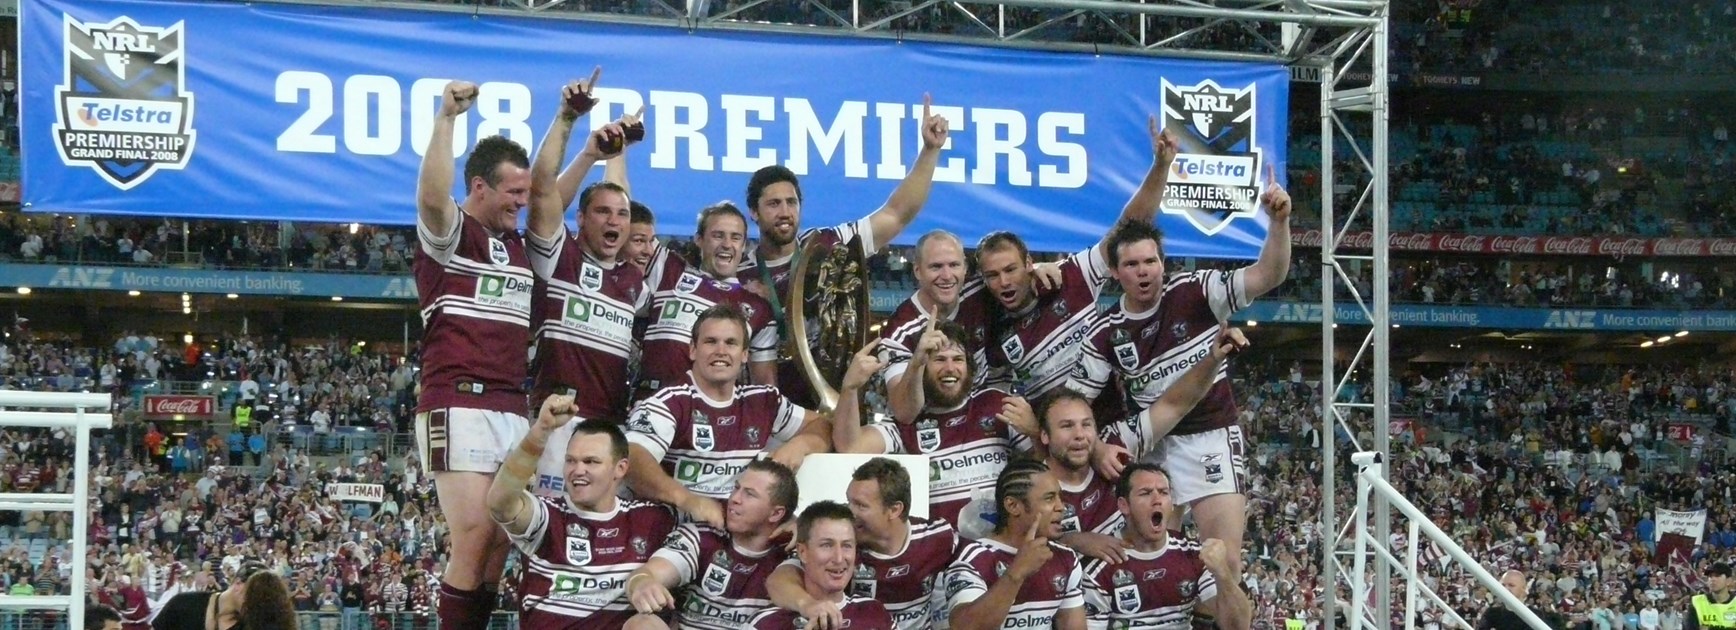 The famous 40-0 premiership victory